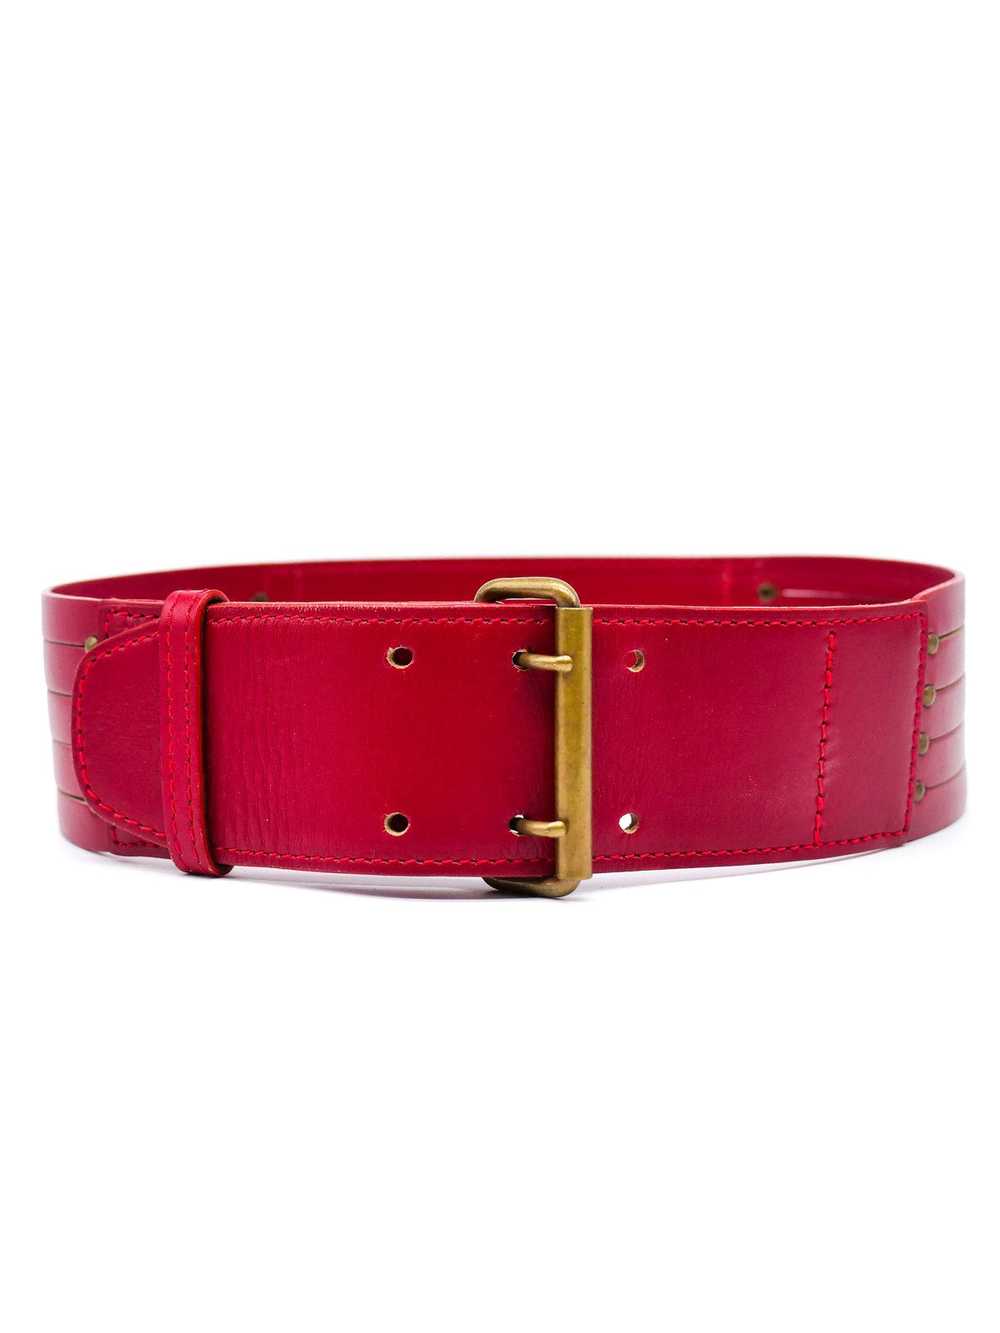 Alaia Perforated Red Leather Belt - image 2